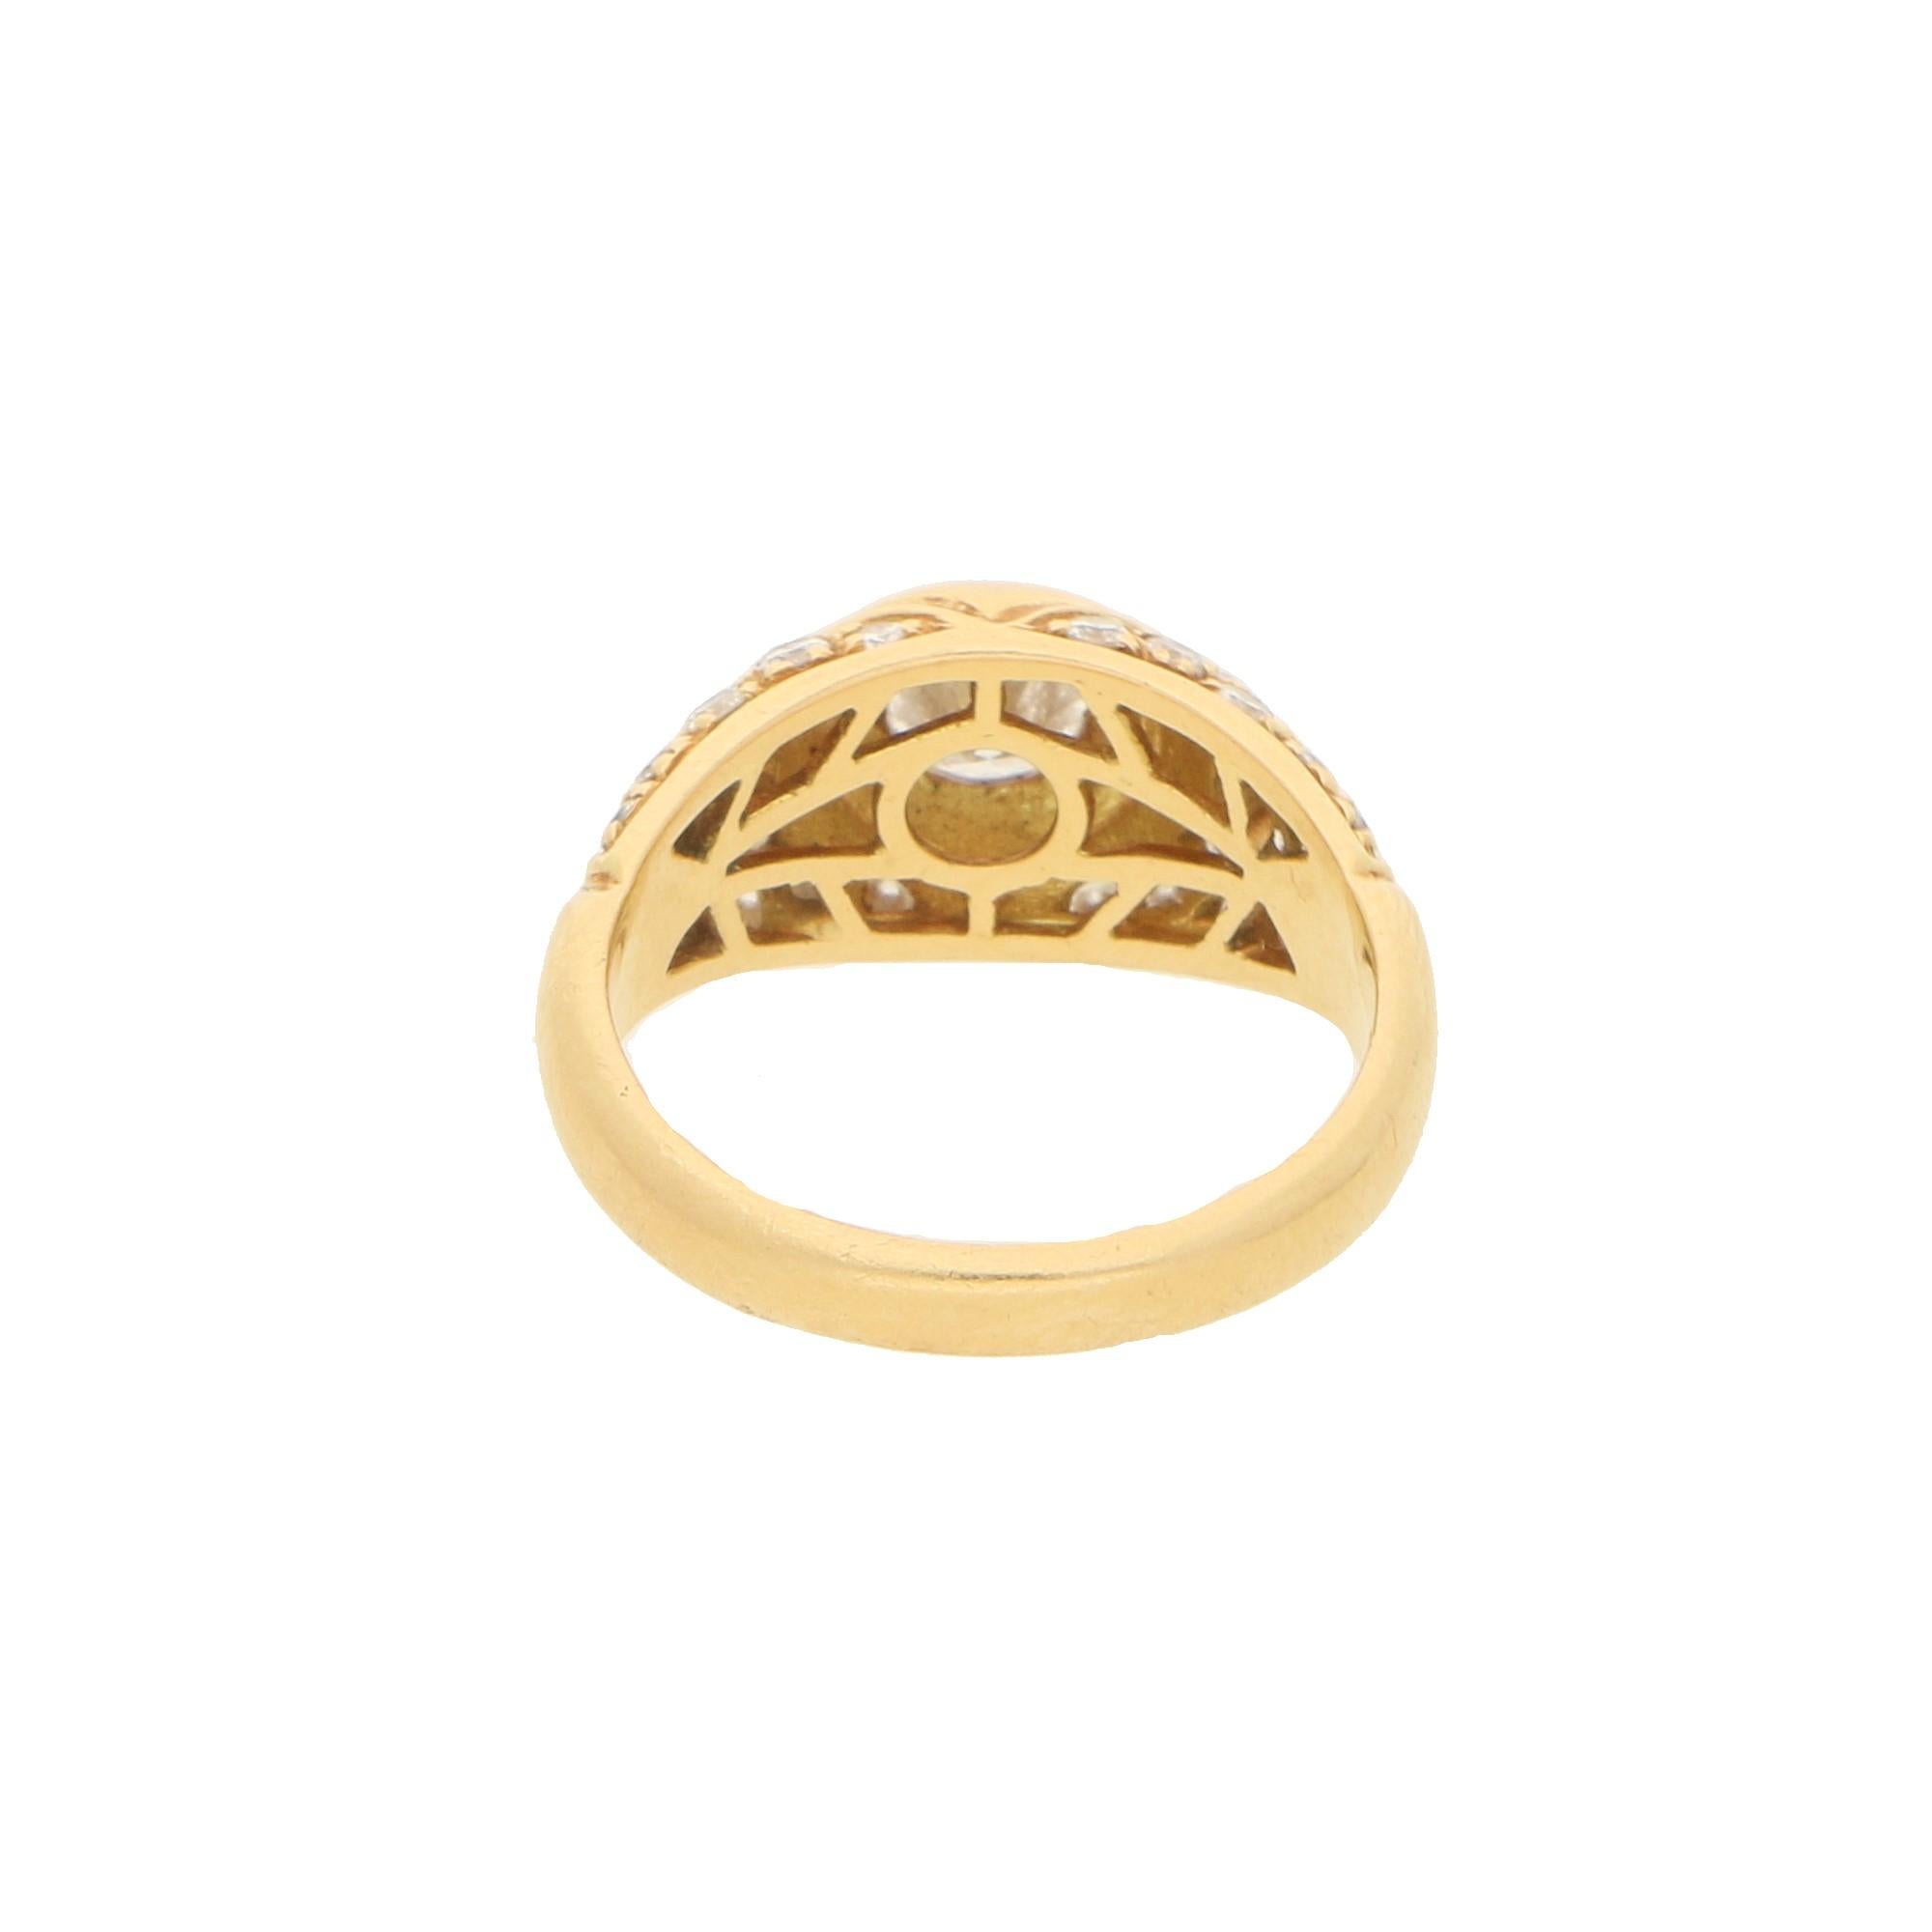 Contemporary Bvlgari Diamond Engagement/Cocktail Ring in 18k Yellow Gold 